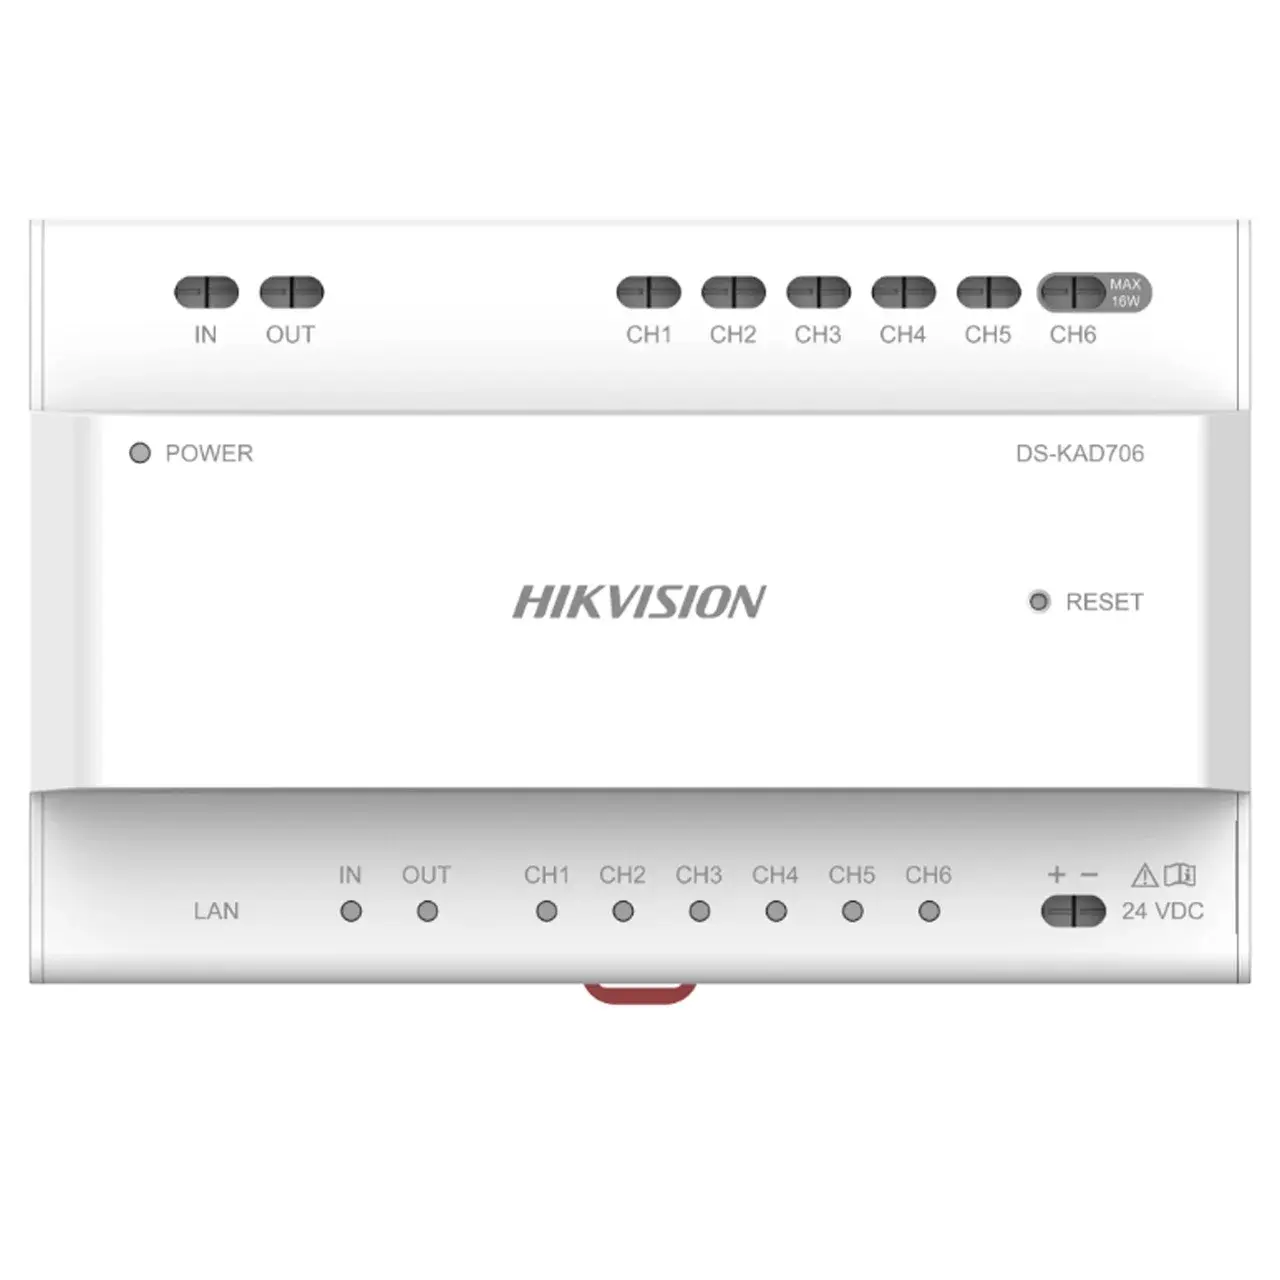 HIKVISION VIDEO AUDIO DISTRUBUTOR DS-KAD706-P Multiple Inputs and Outputs HD Video Support Remote Monitoring Integration